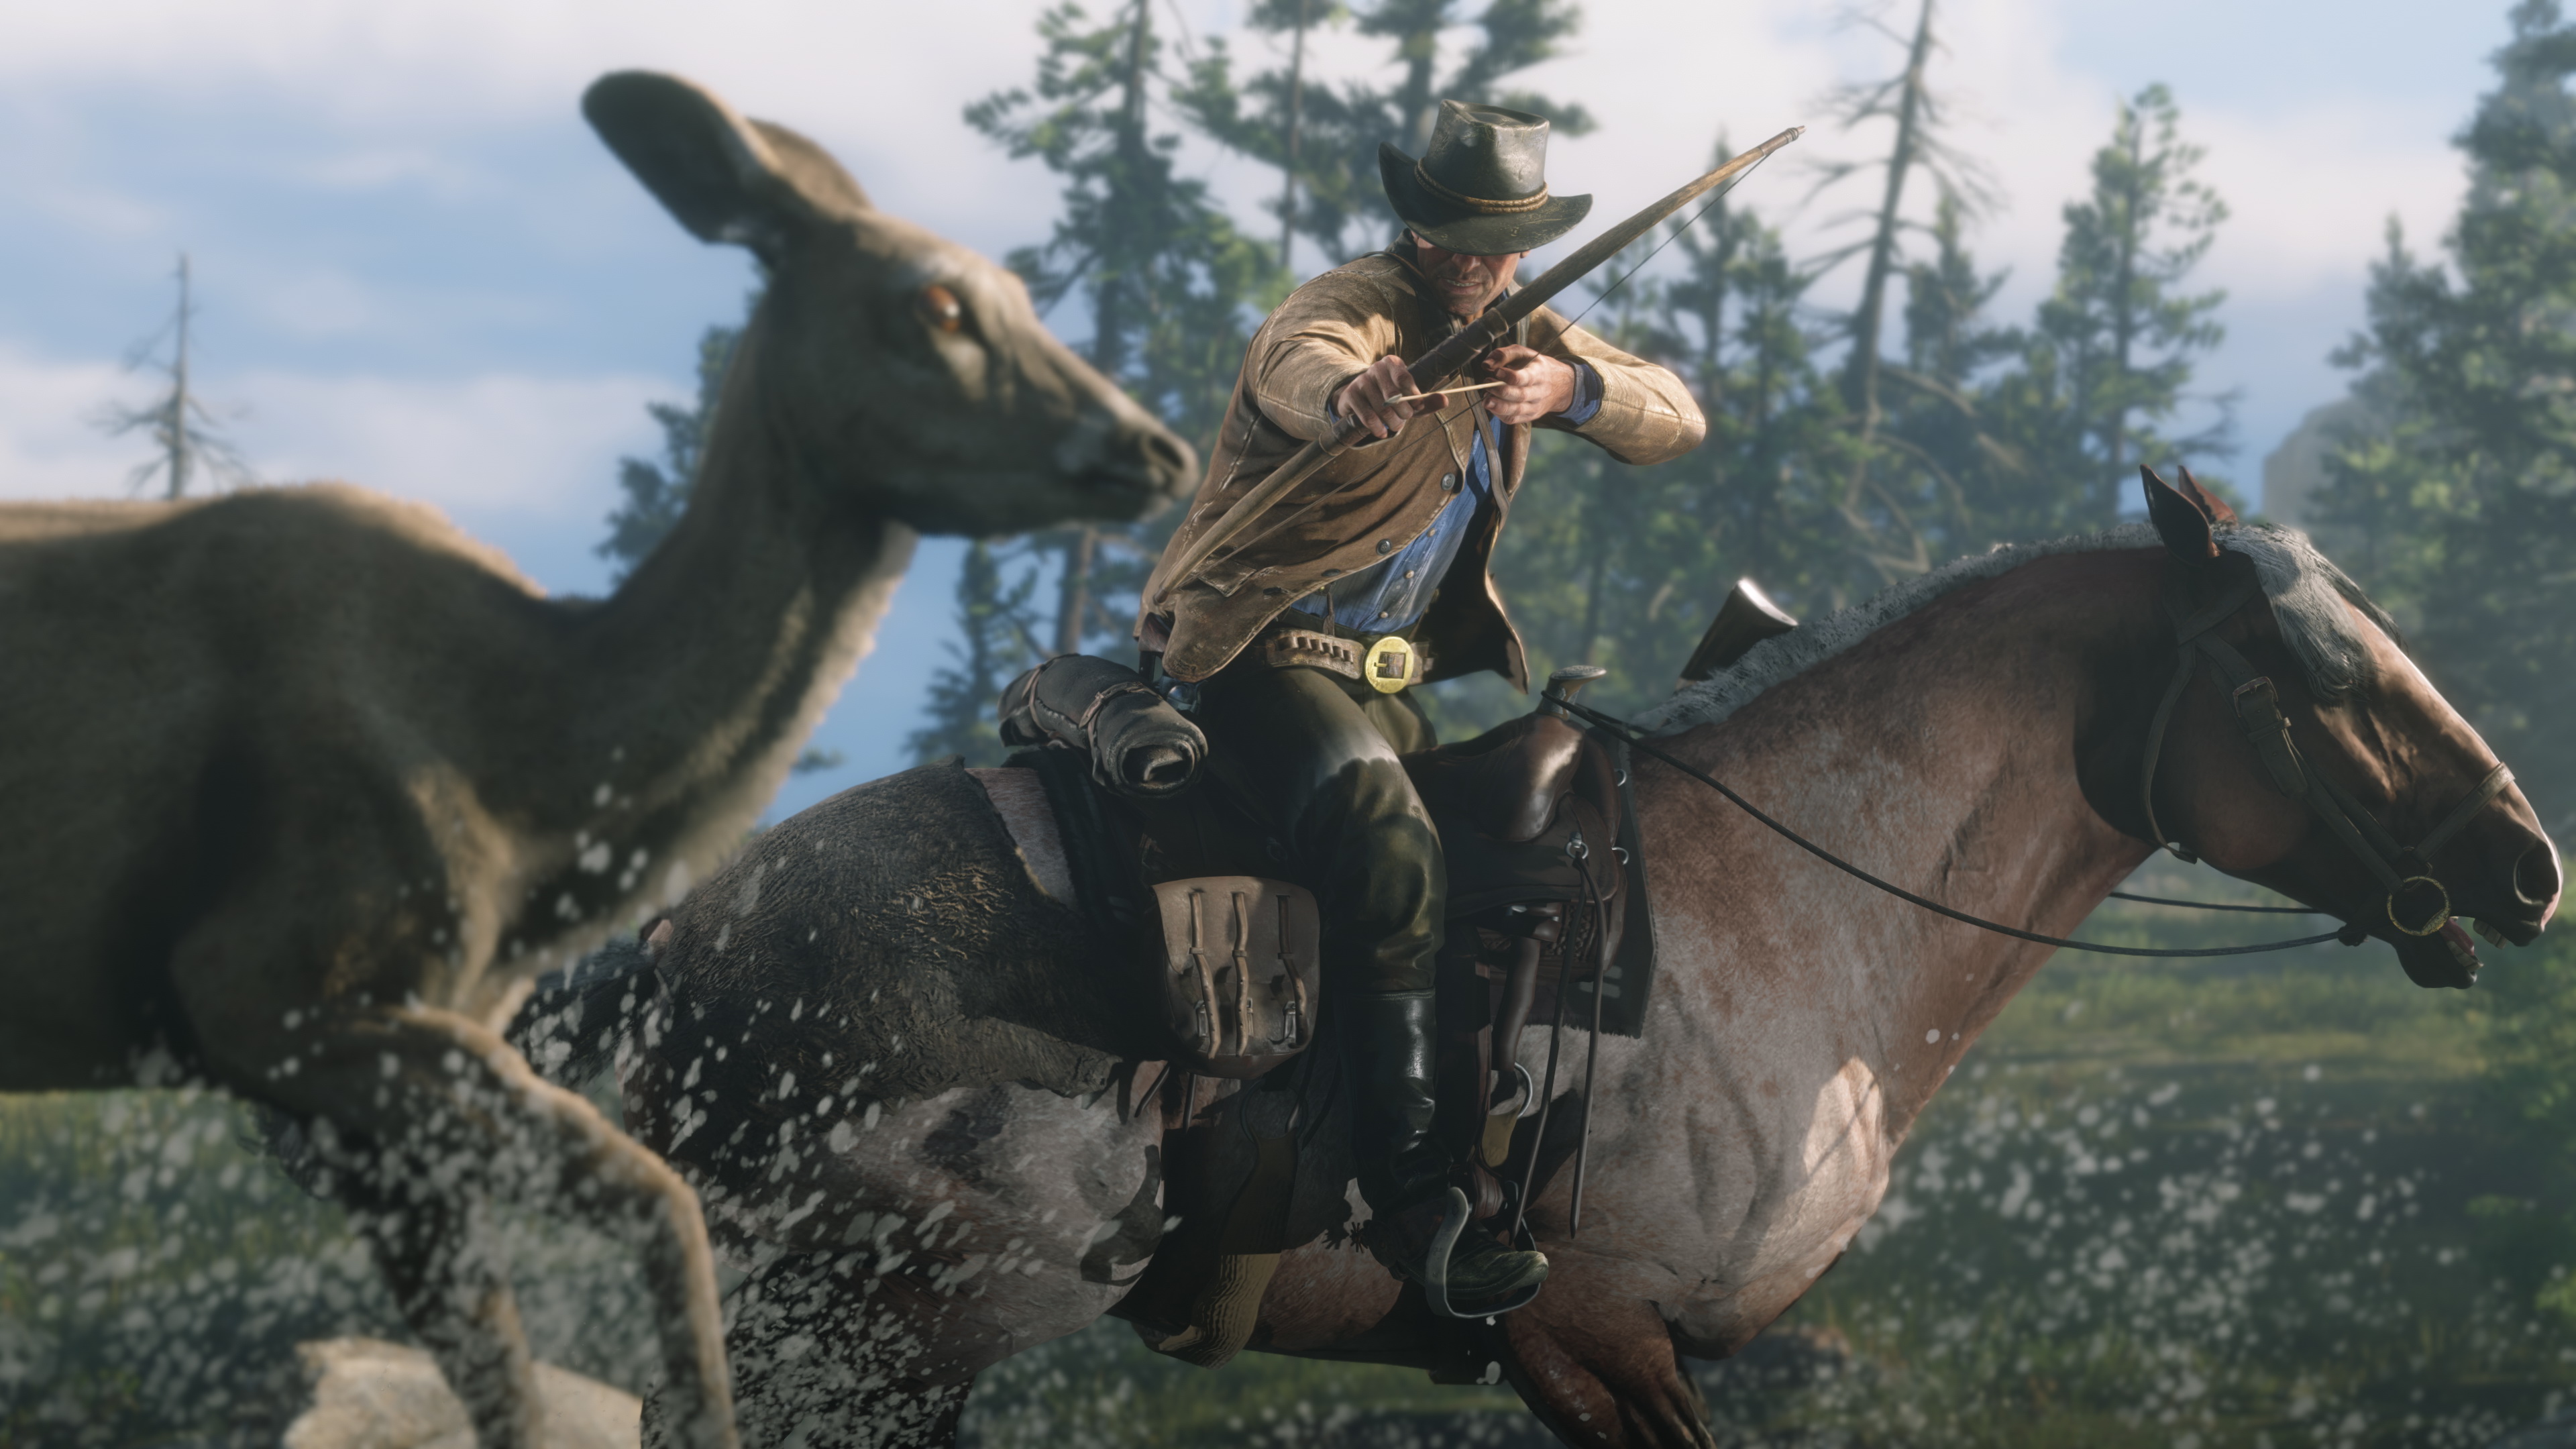 Red Dead Redemption 2 helps people learn about animals when not shooting them